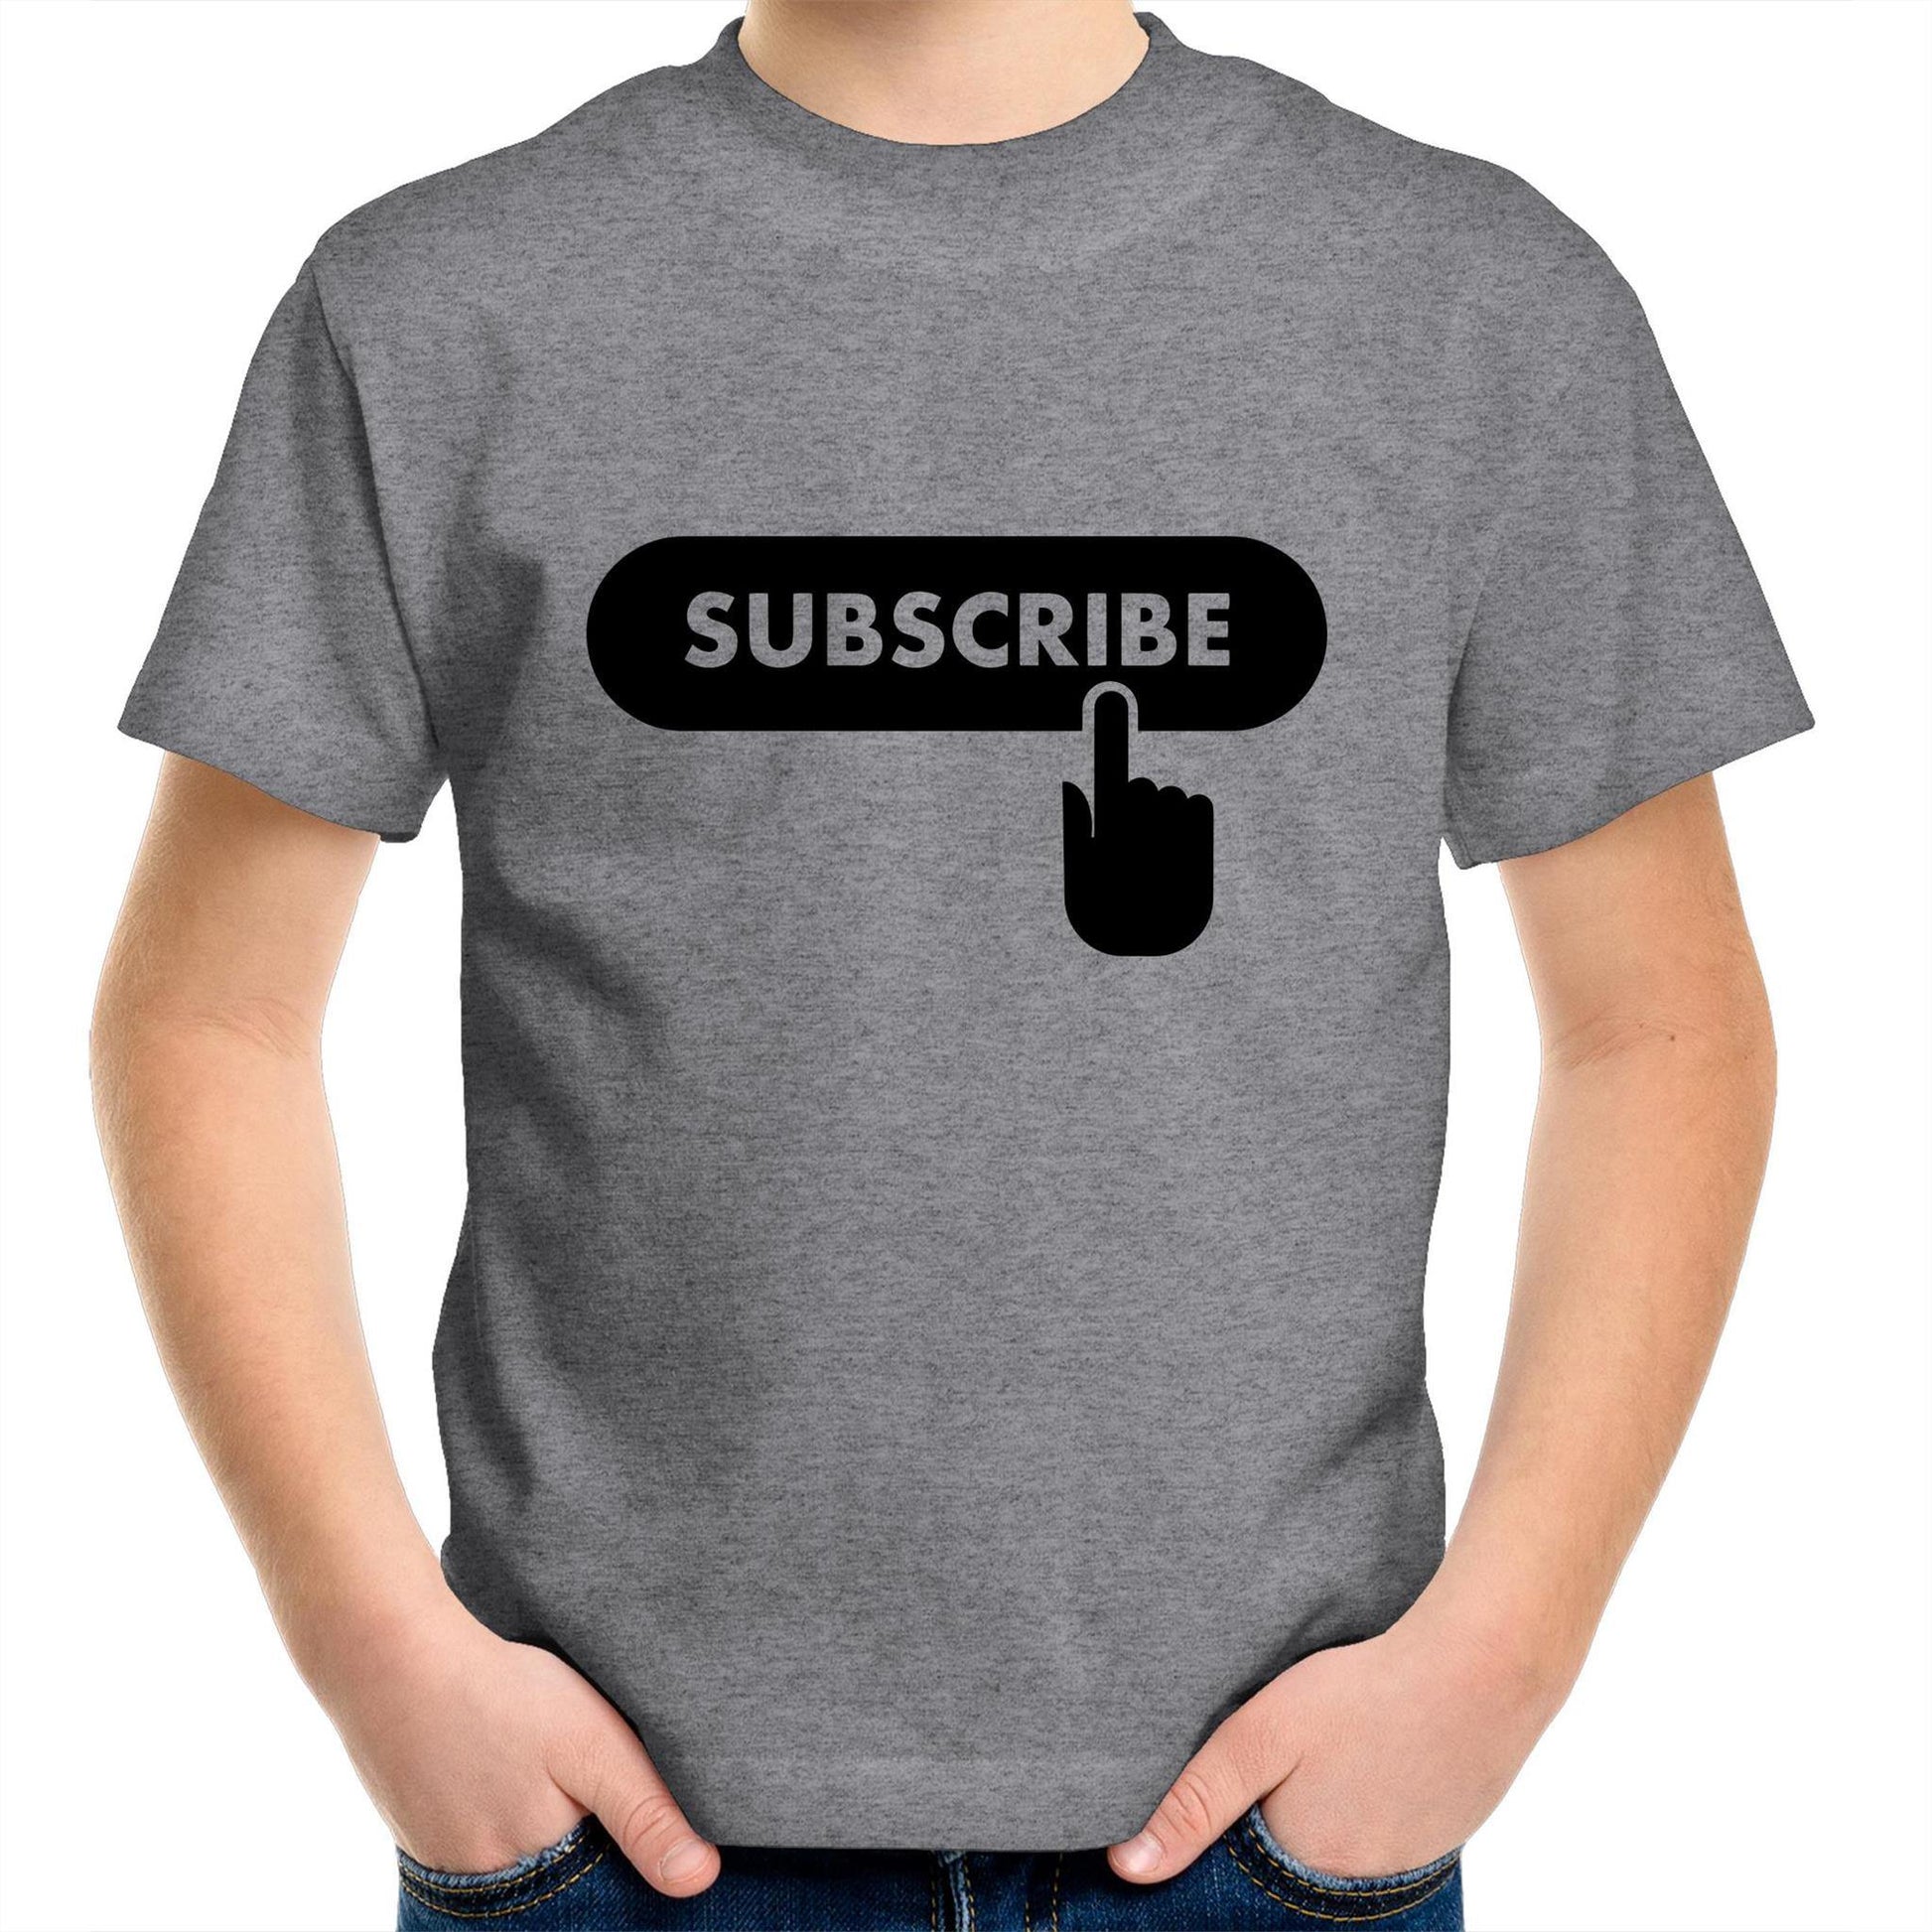 Subscribe - Kids Youth Crew T-Shirt Grey Marle Kids Youth T-shirt Funny